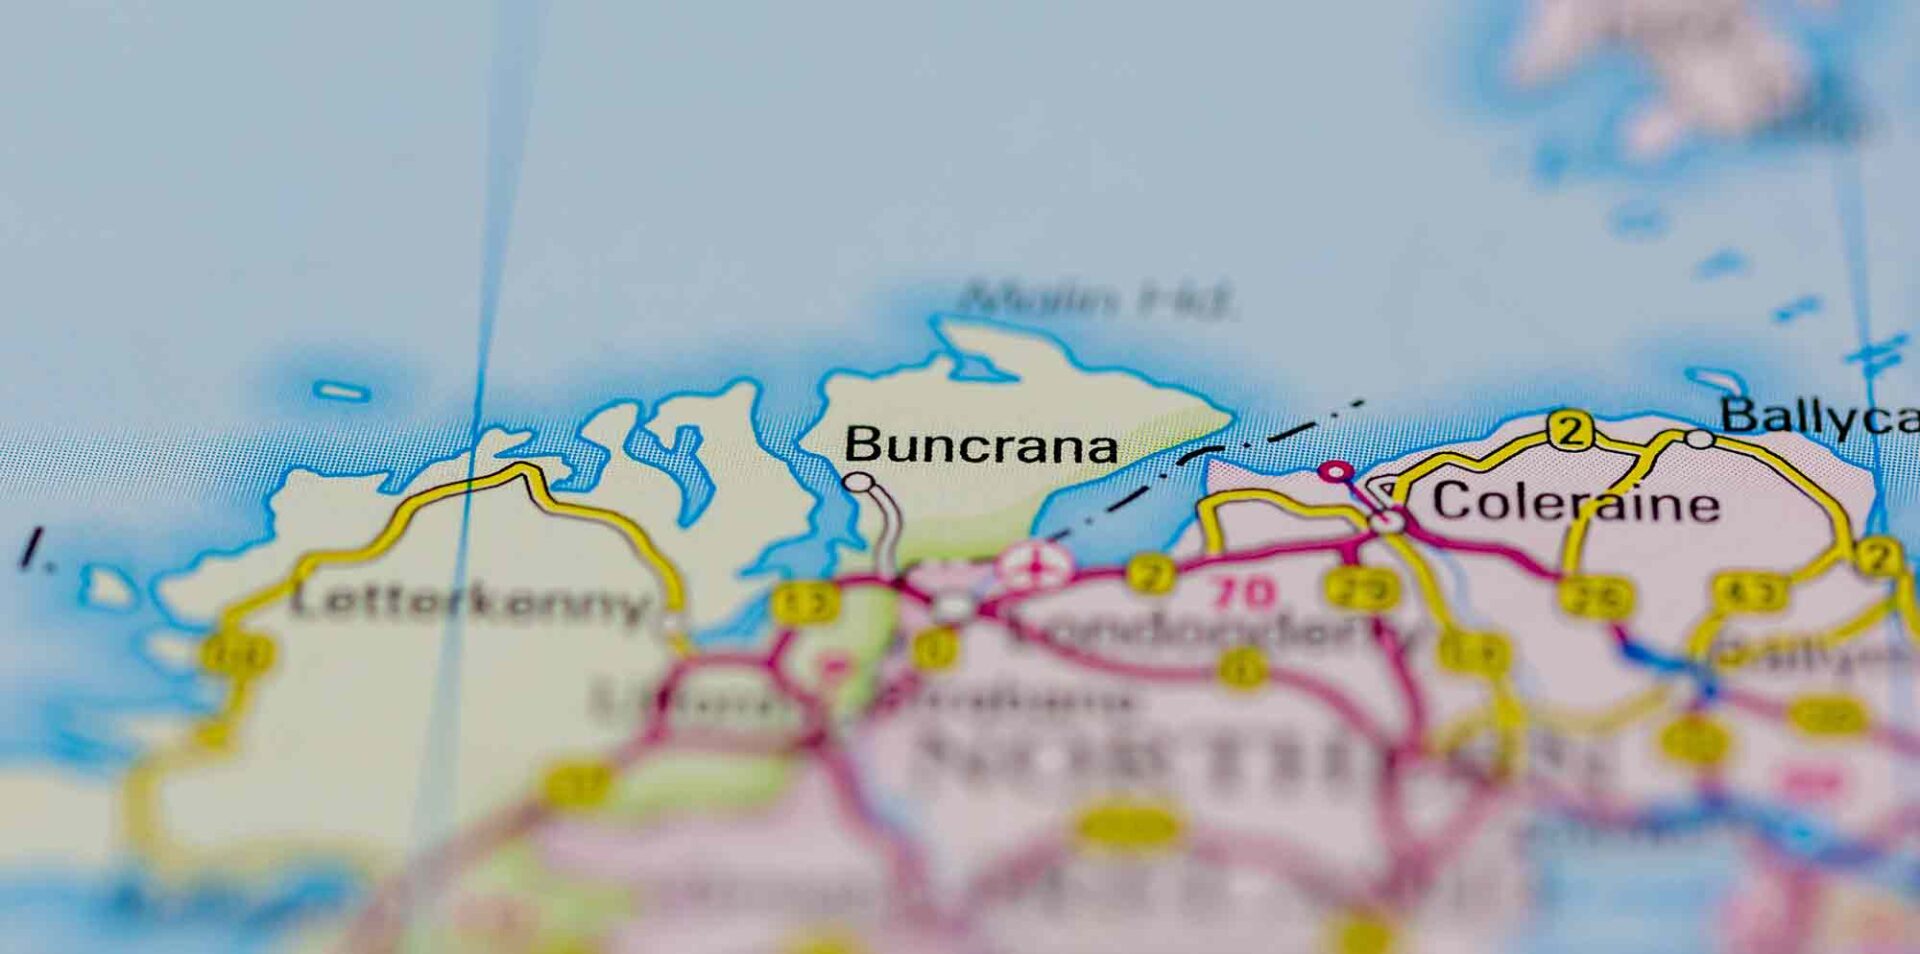 Eggman Tours photo of a map pointing to Buncrana